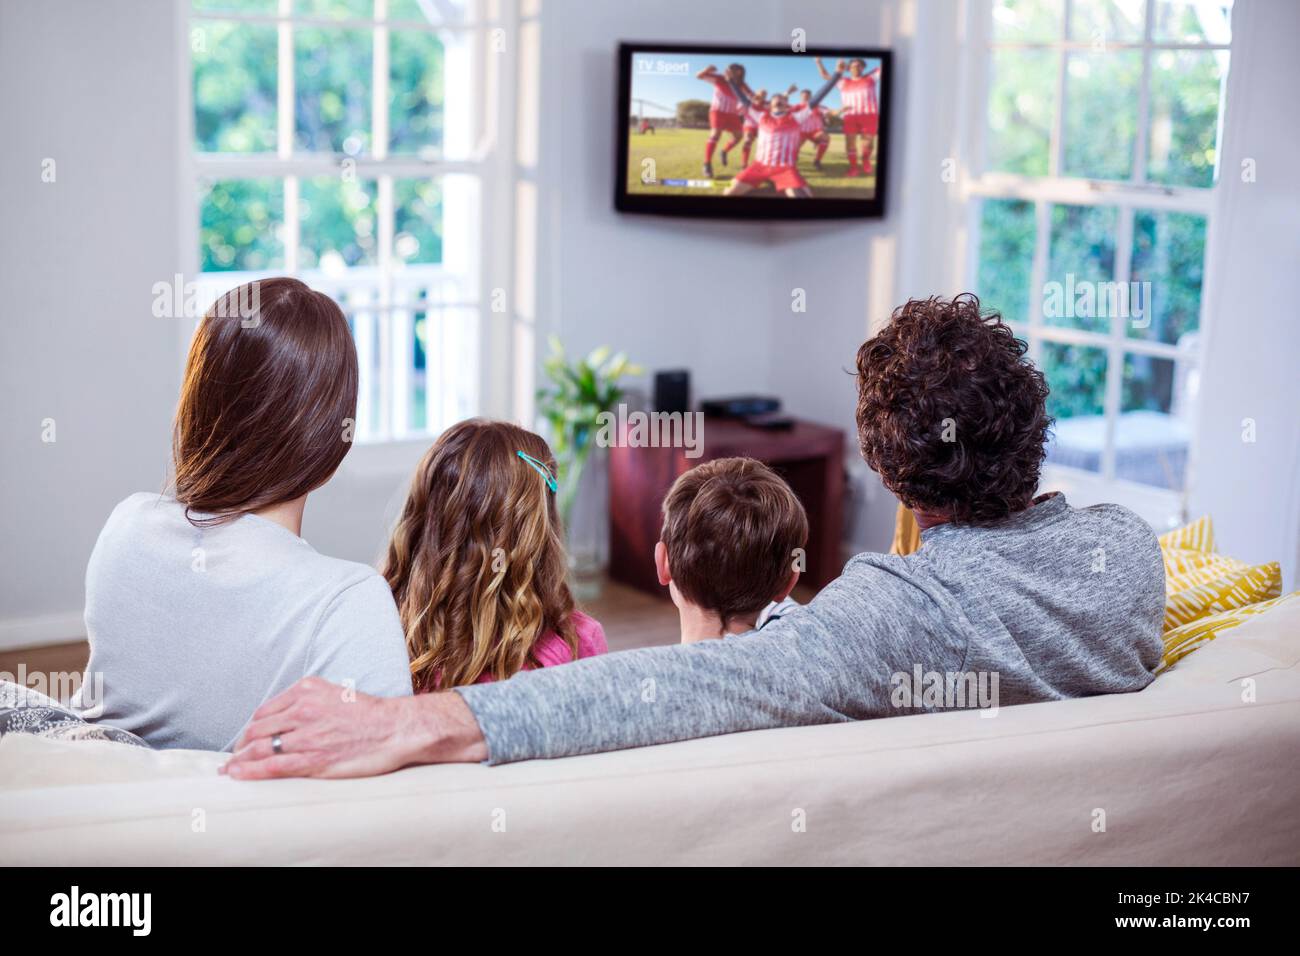 Caucasian family watching tv with football match on screen Stock Photo